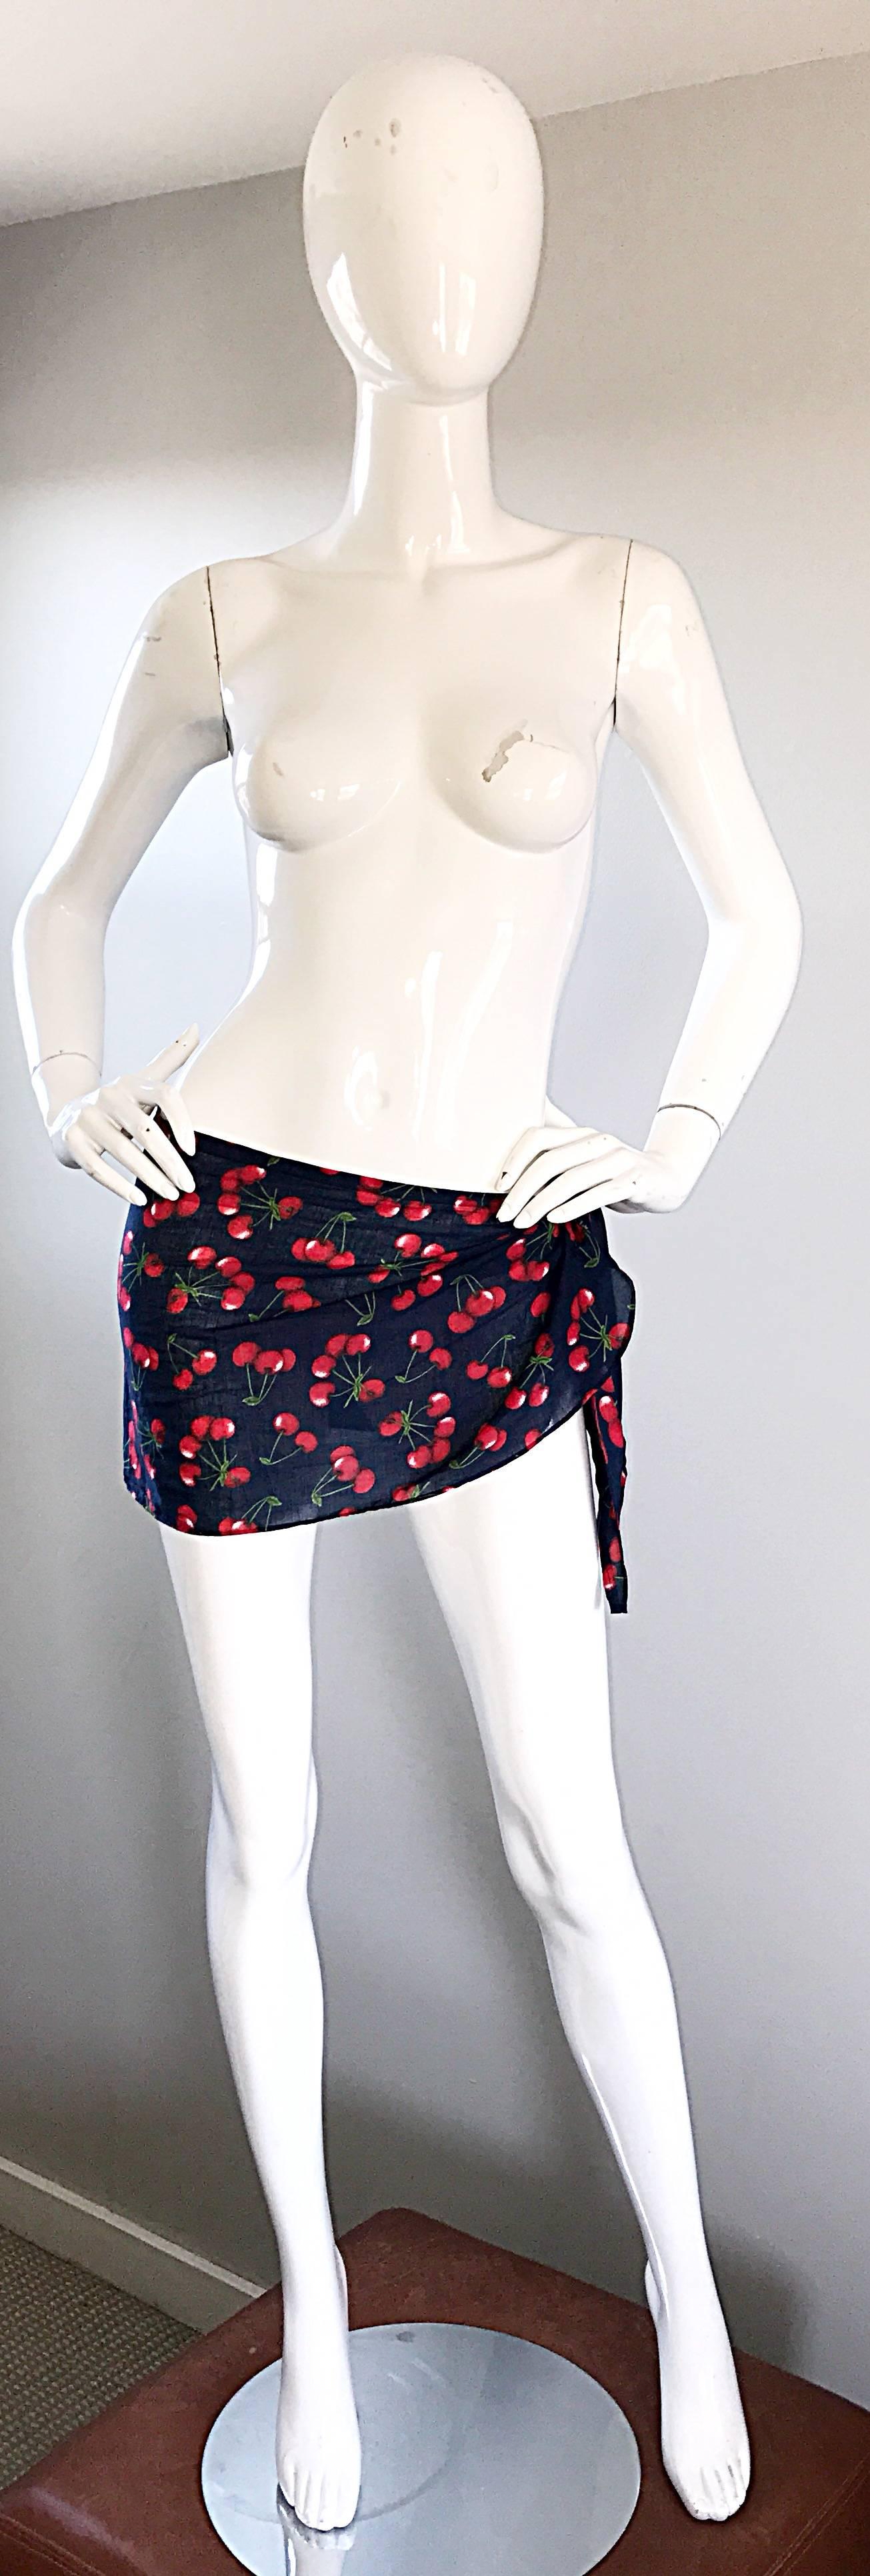 NWT 1990s Dolce and Gabbana Black and Red Cherry Print Swimsuit Cover Up Skirt 4